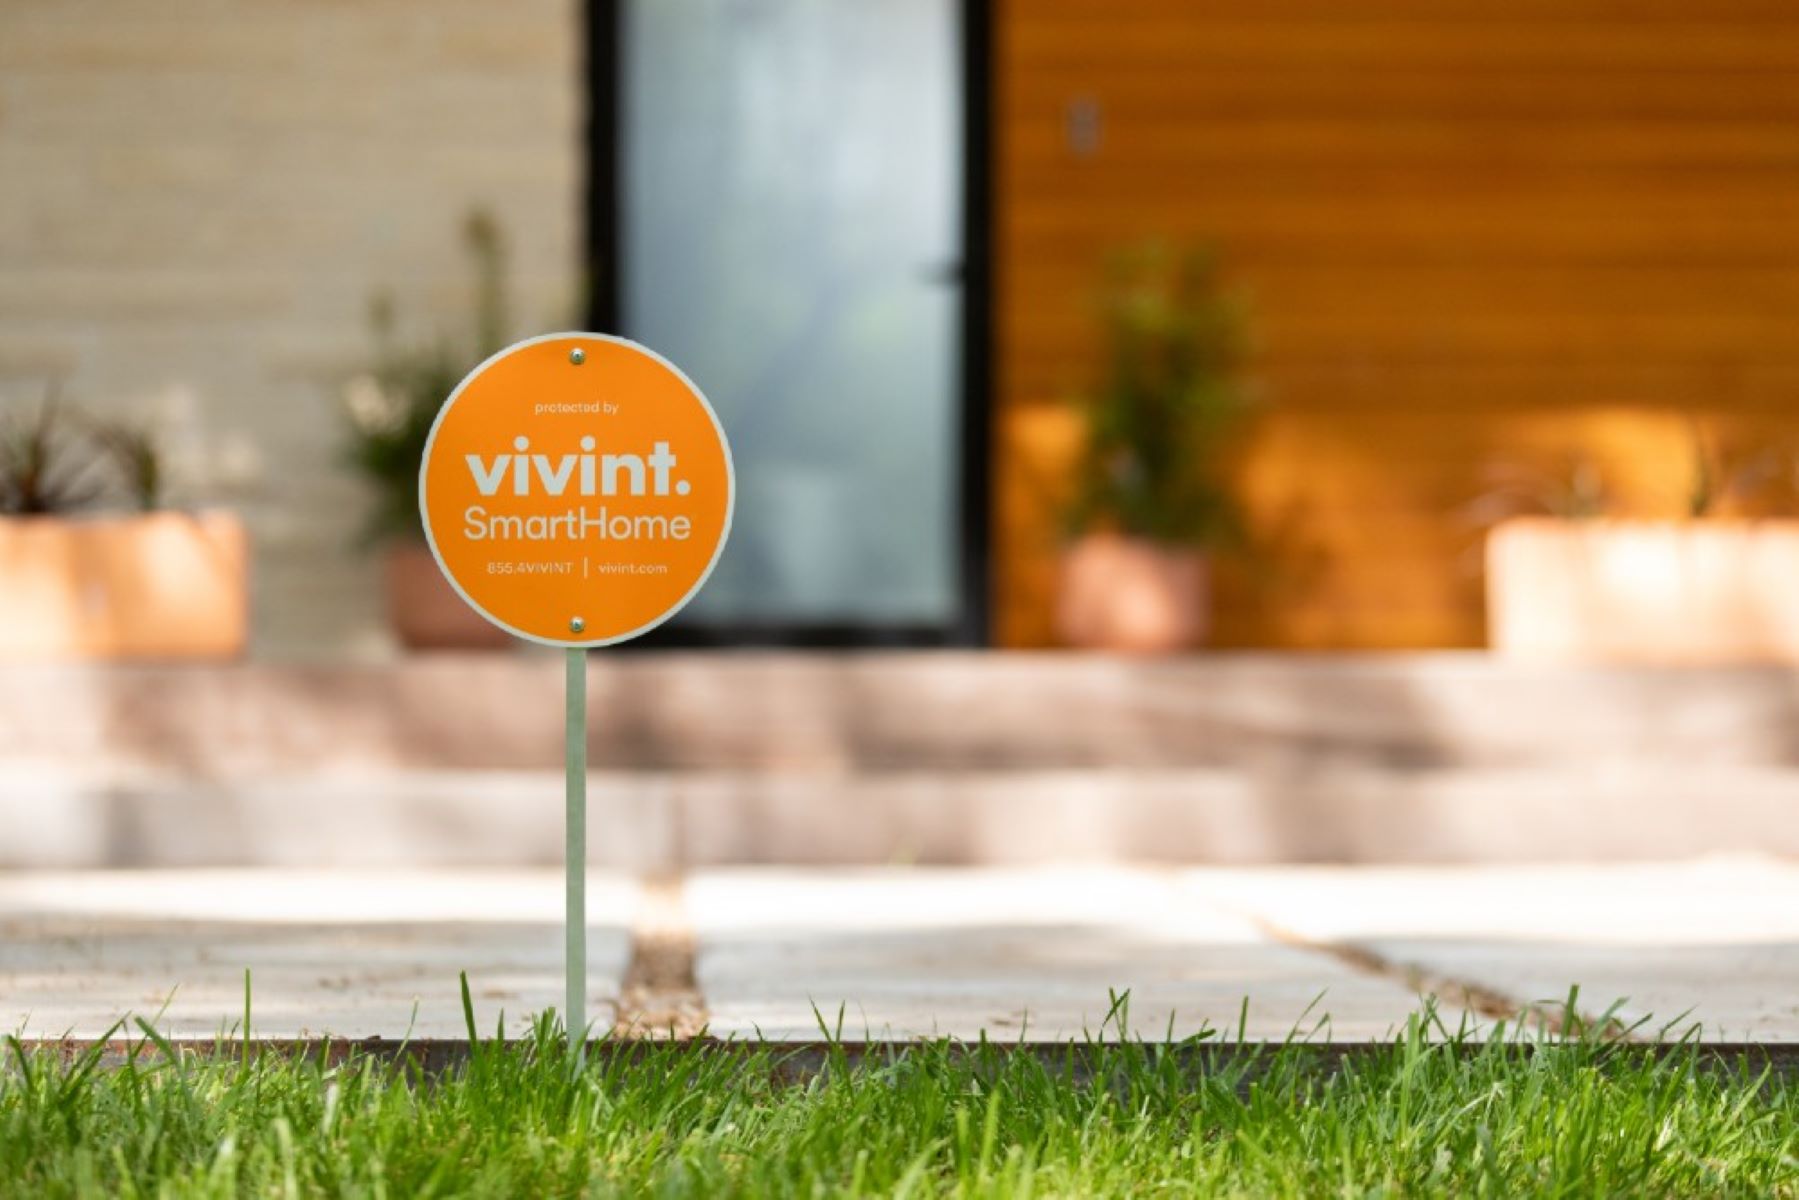 How Much Is Vivint Smart Home